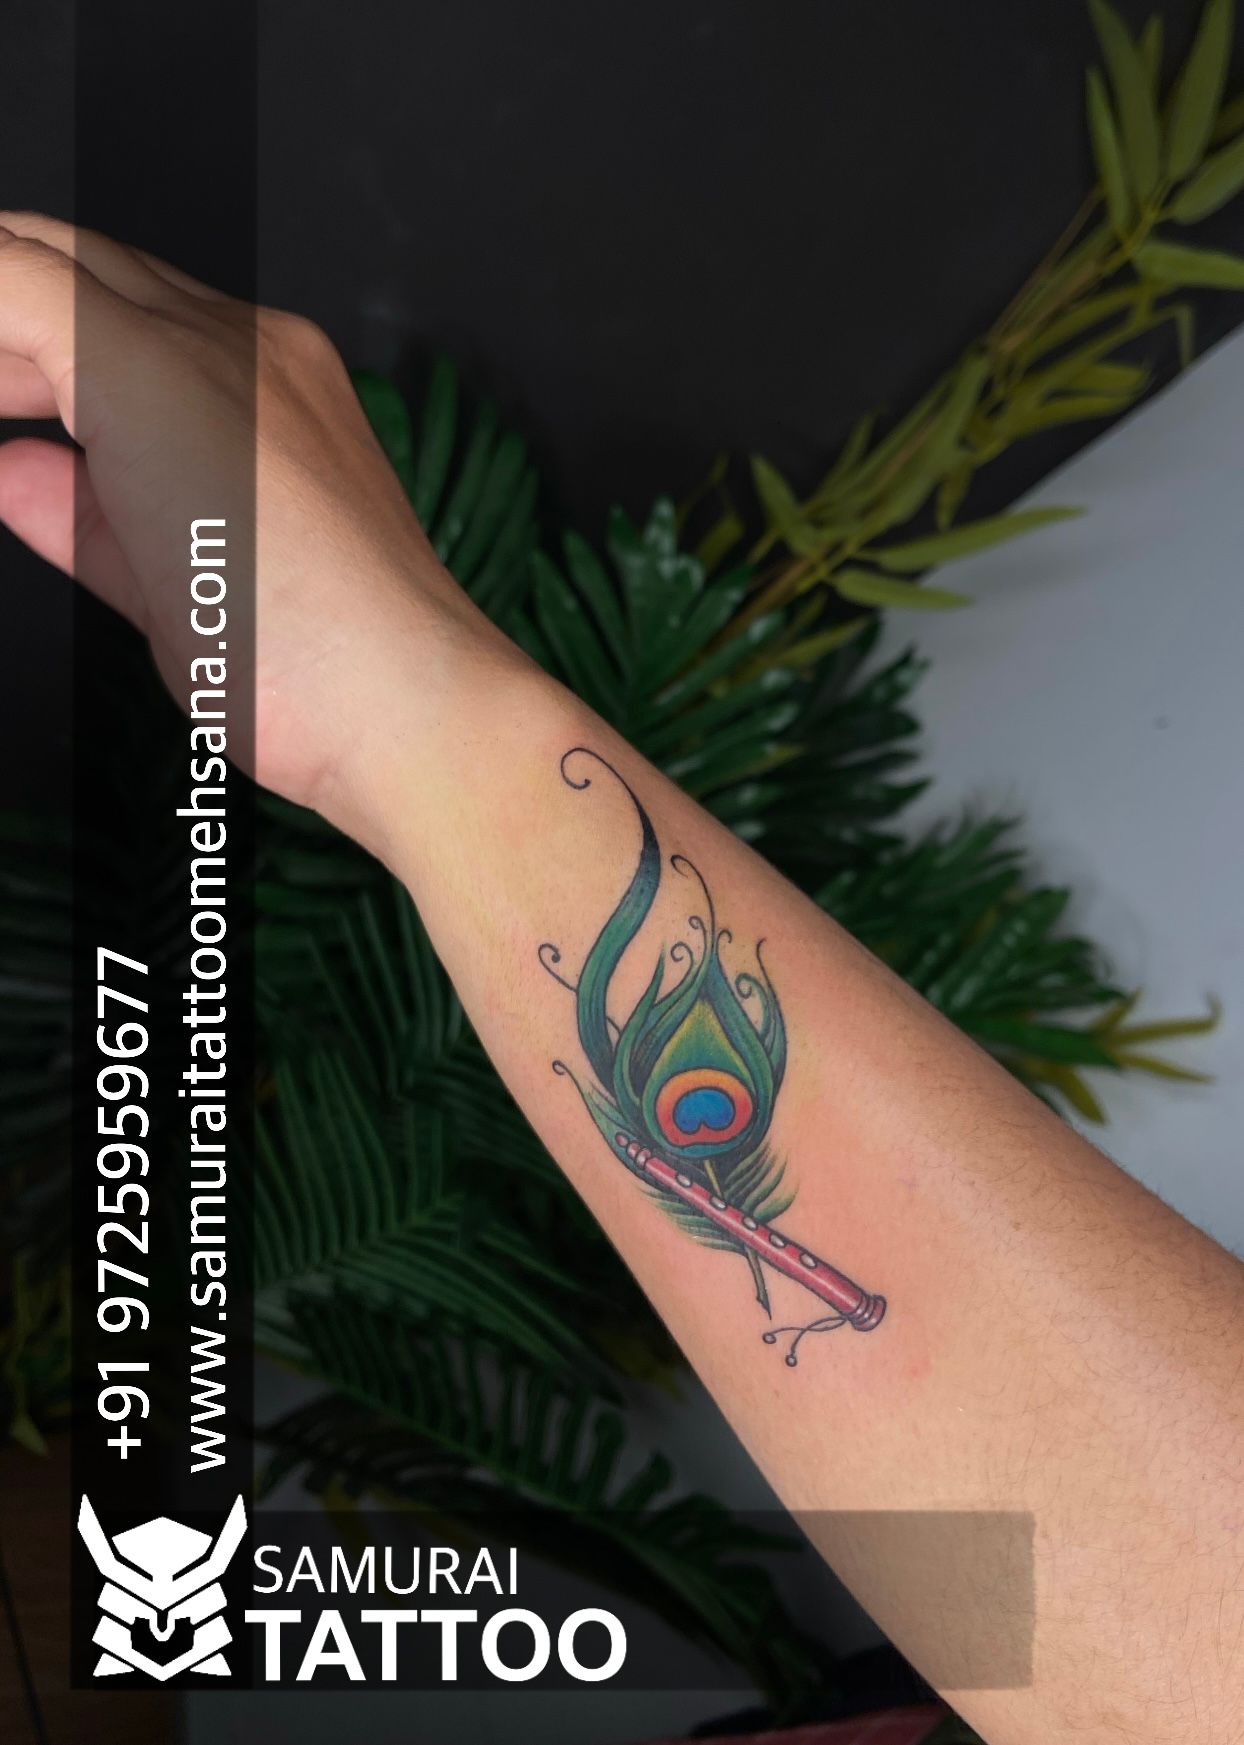 Tattoo uploaded by Vipul Chaudhary  flute with feather tattoo Krishna  tattoo Lord krishna tattoo Flute with feather tattoo ideas  Tattoodo